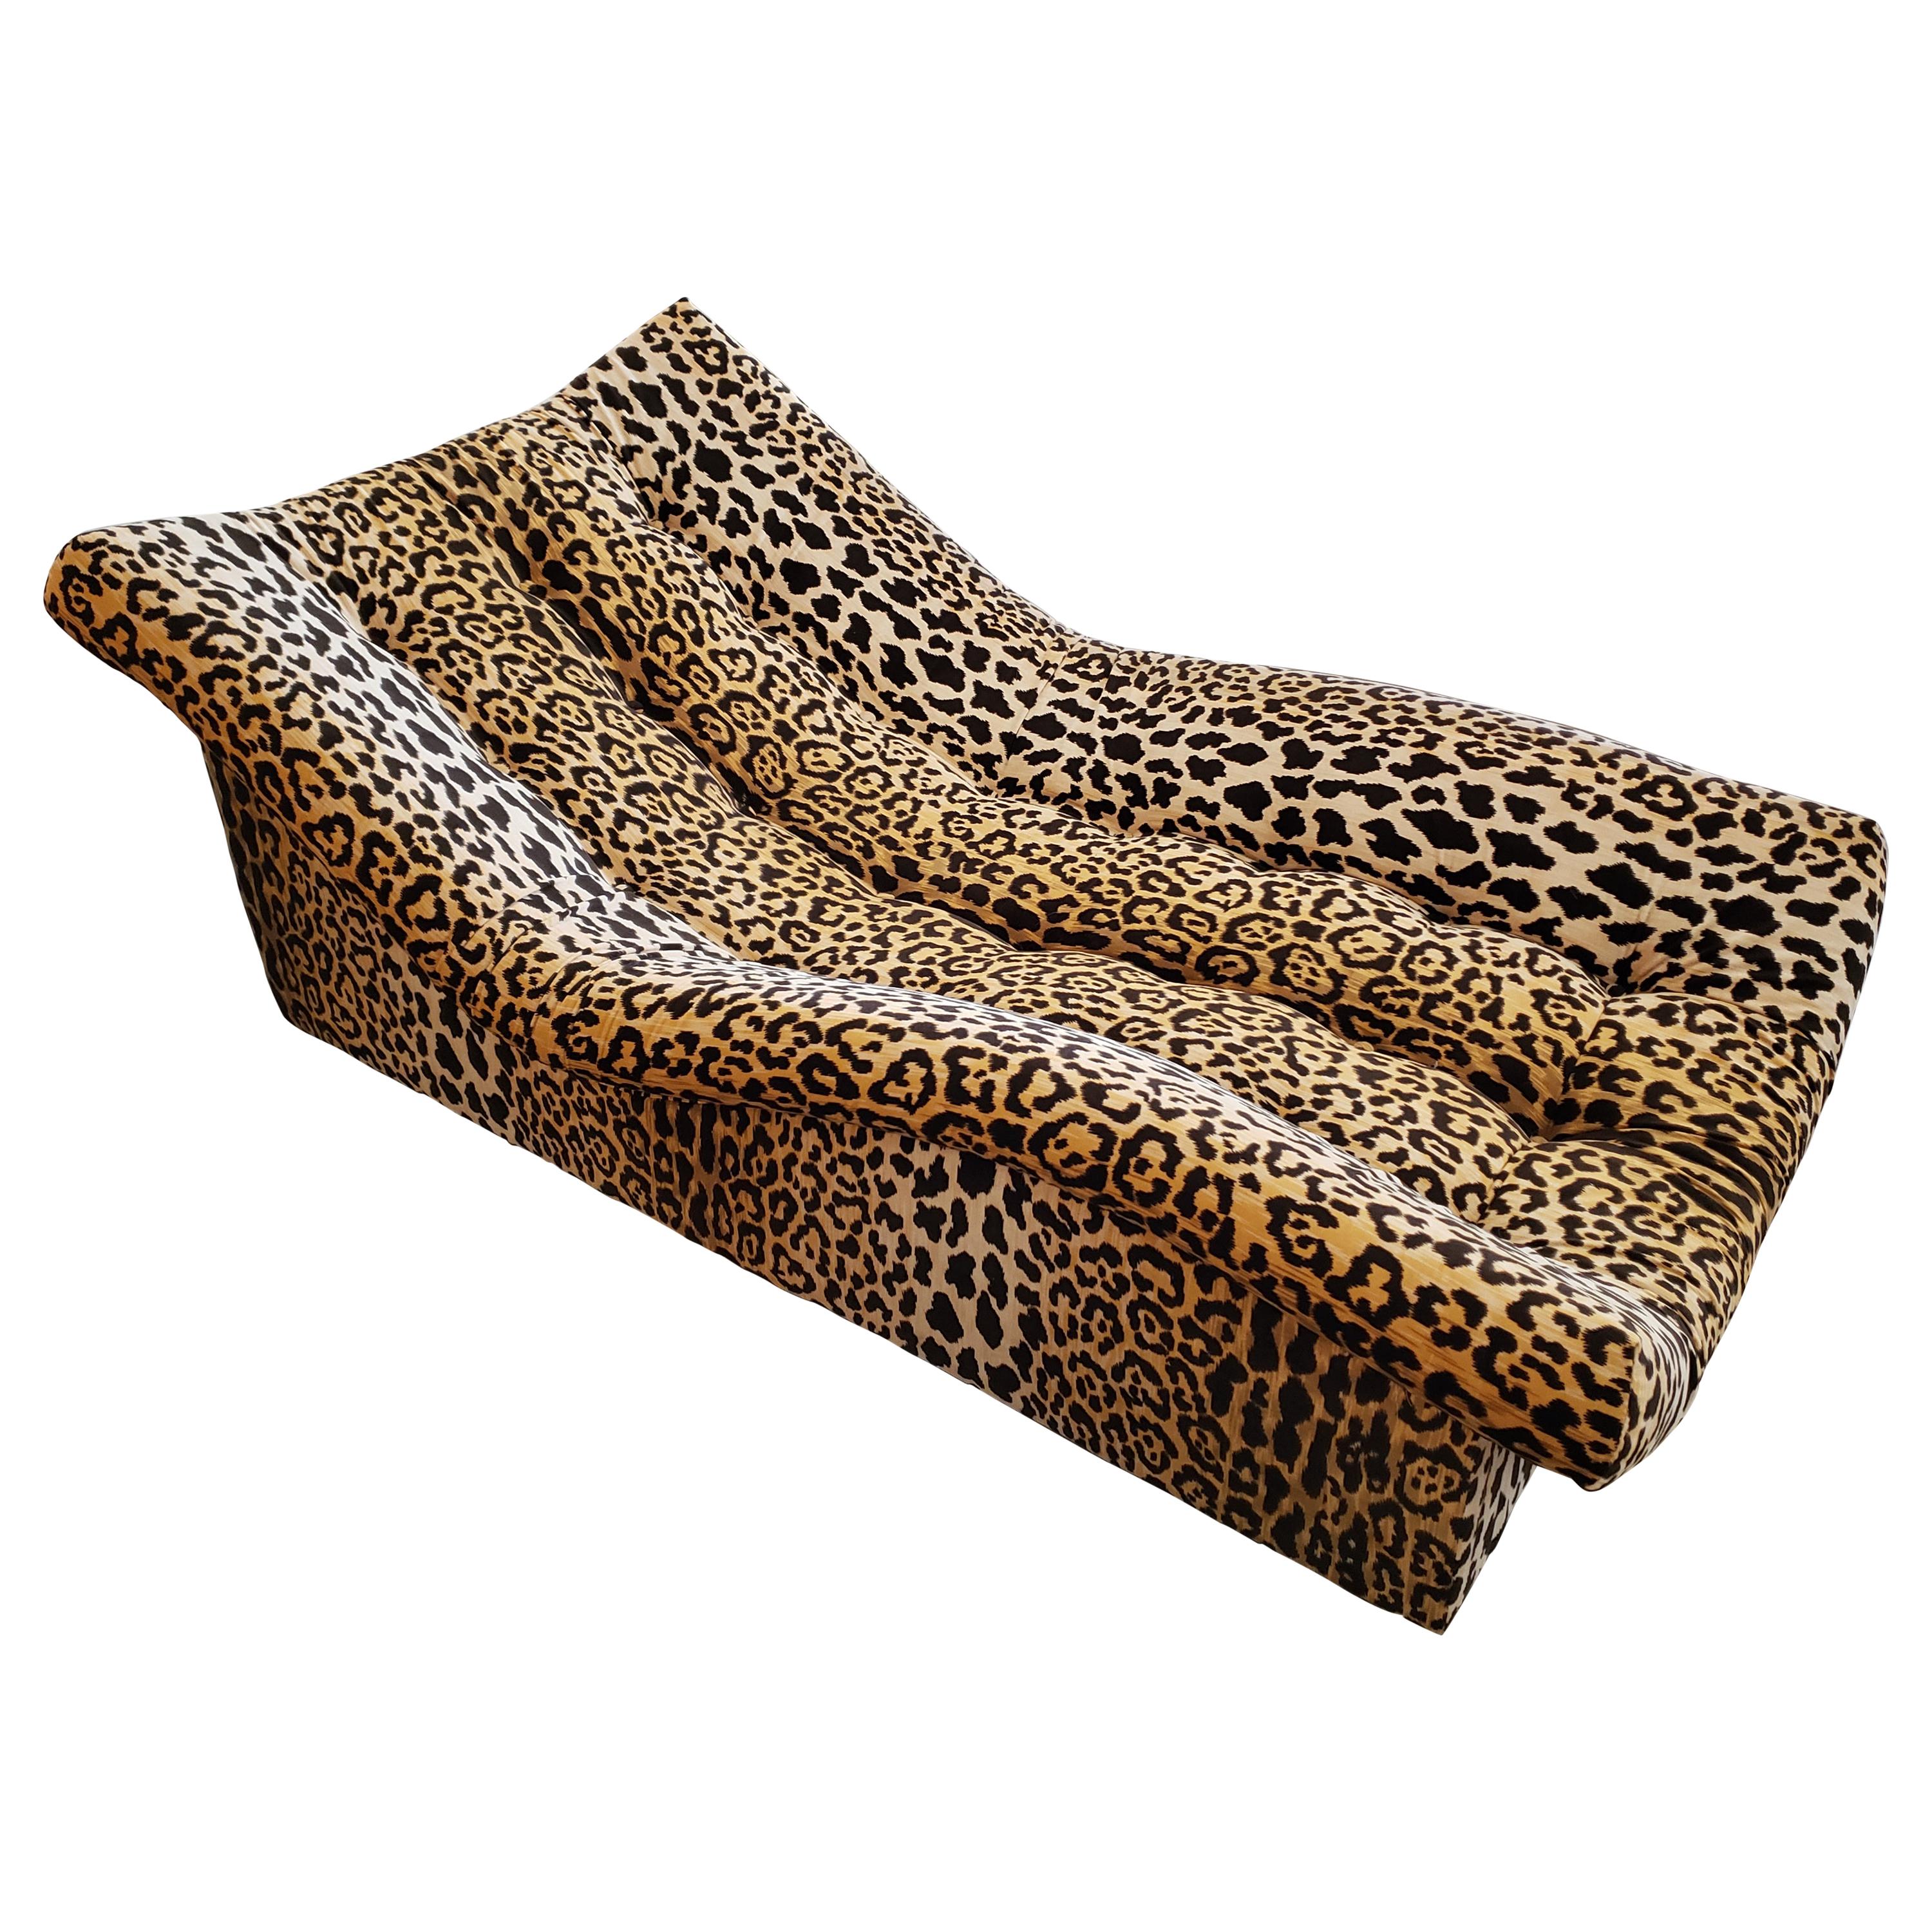 Vintage Tufted Leopard Chaise Lounge For Sale